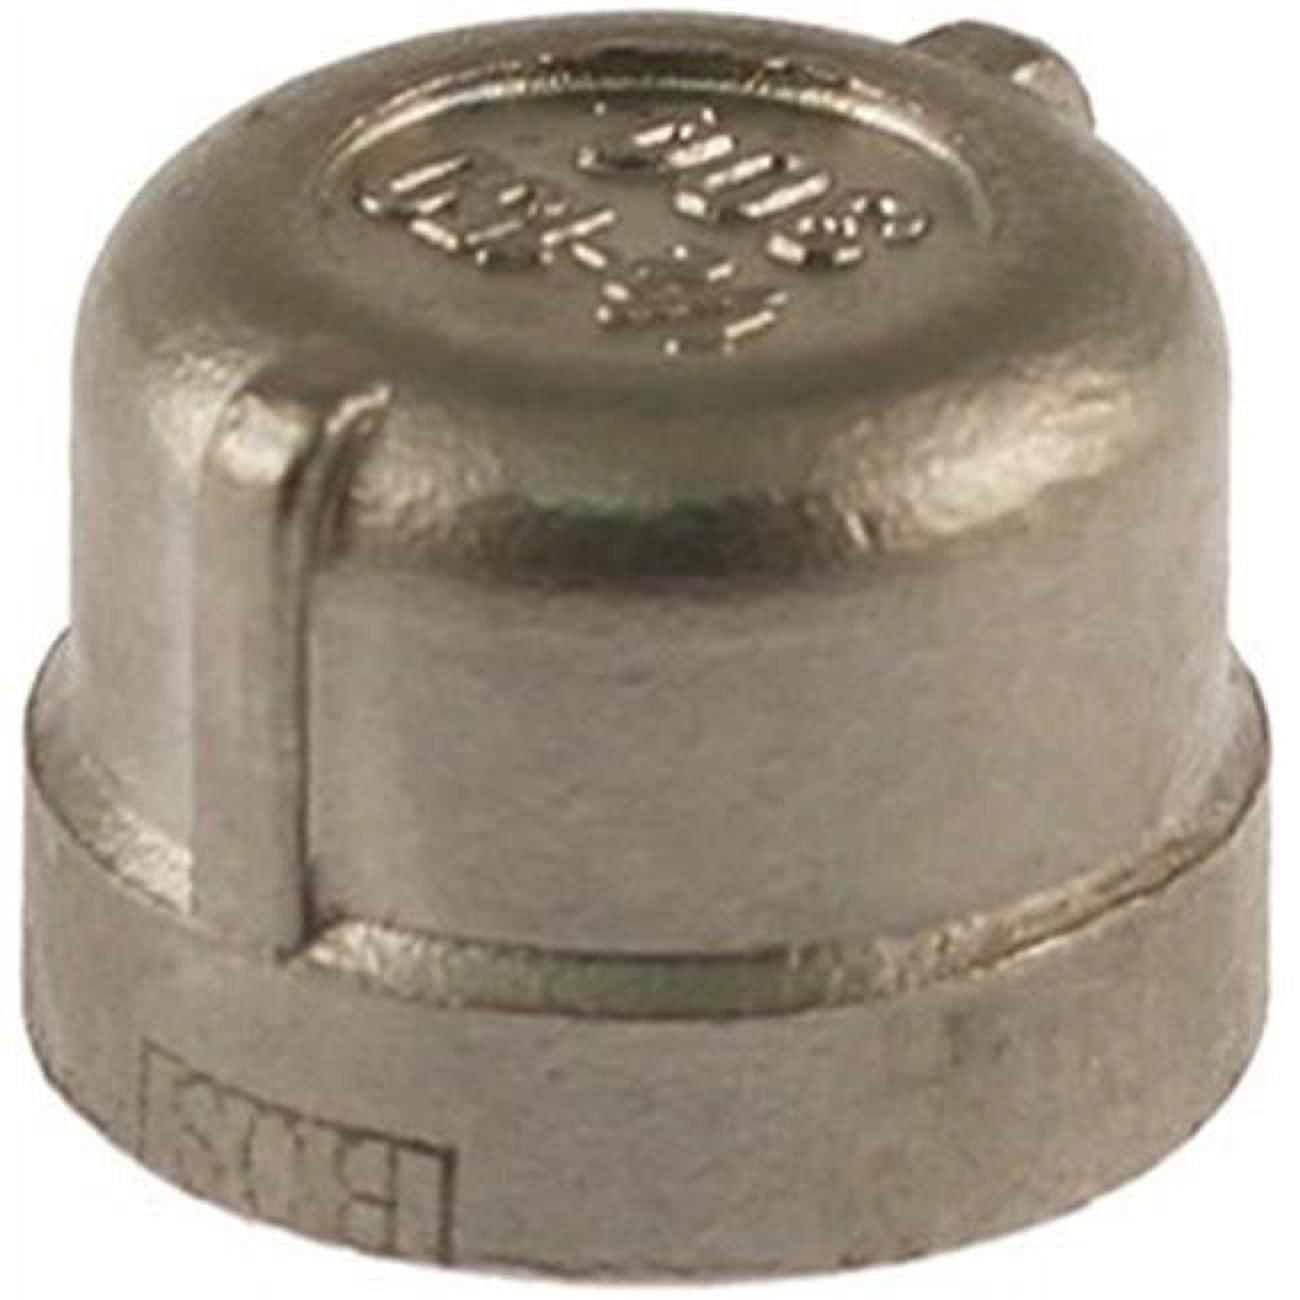 U2-ssca-05 0.5 In. 304 Stainless Steel Cap